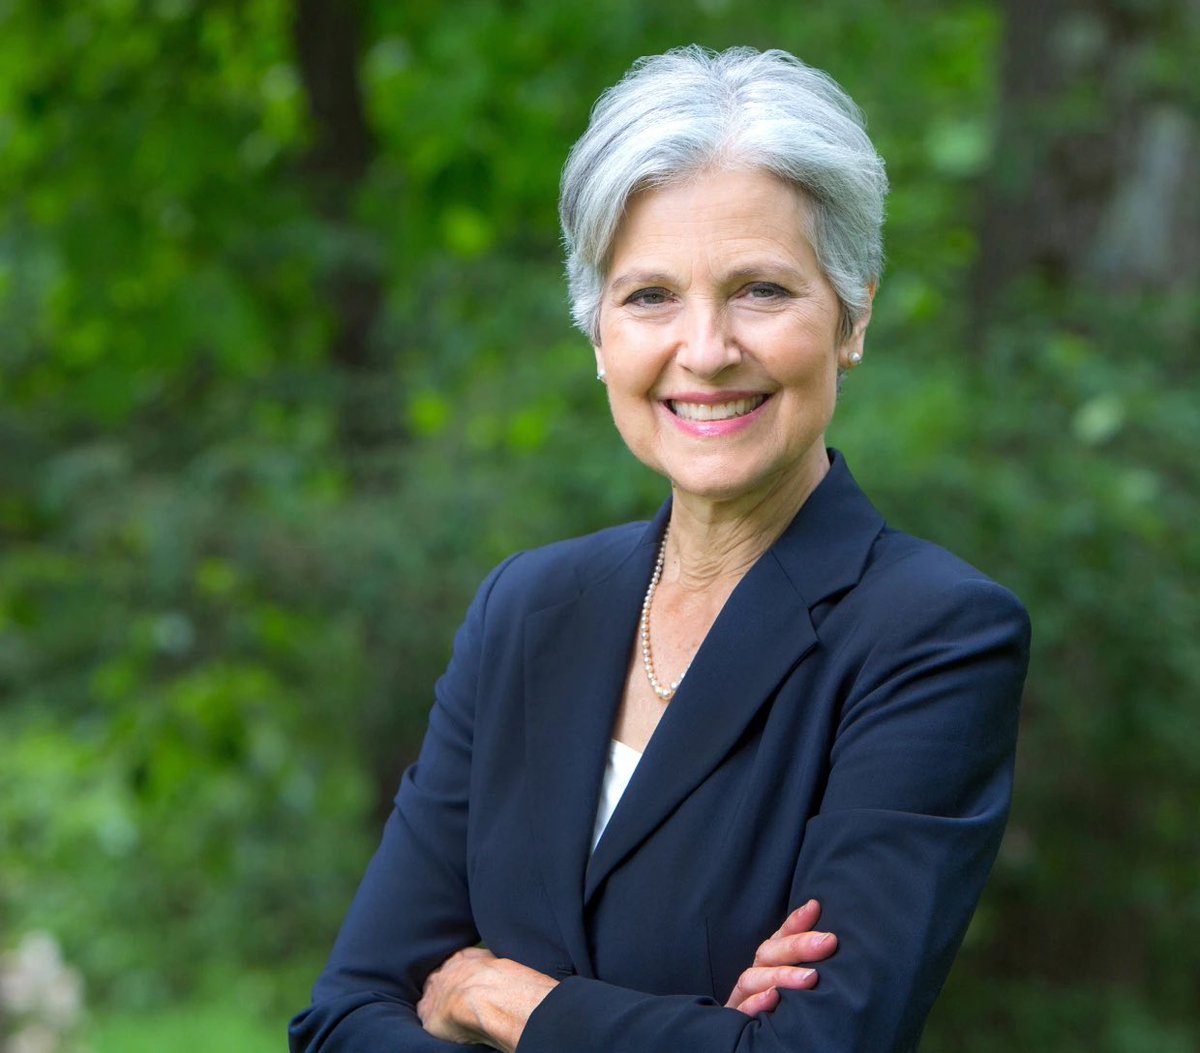 Vote for Jill Stein because she is one of the few politicians who is not bought by AIPAC.